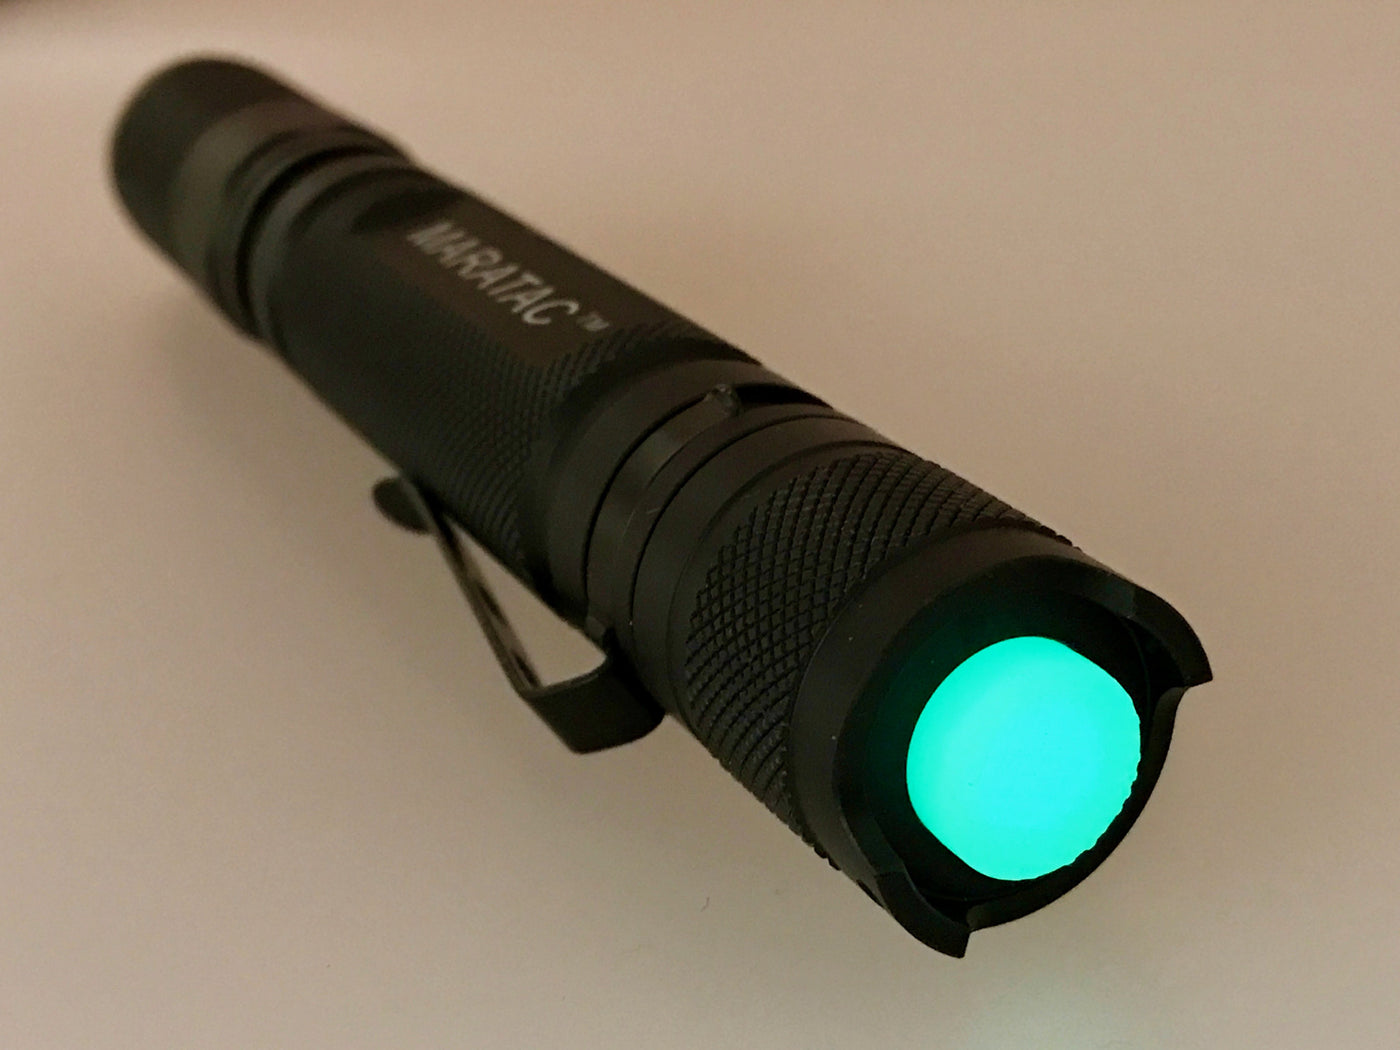 AAx2 Extreme - Glow - Tactical Light by Maratac REV 5 - CountyComm